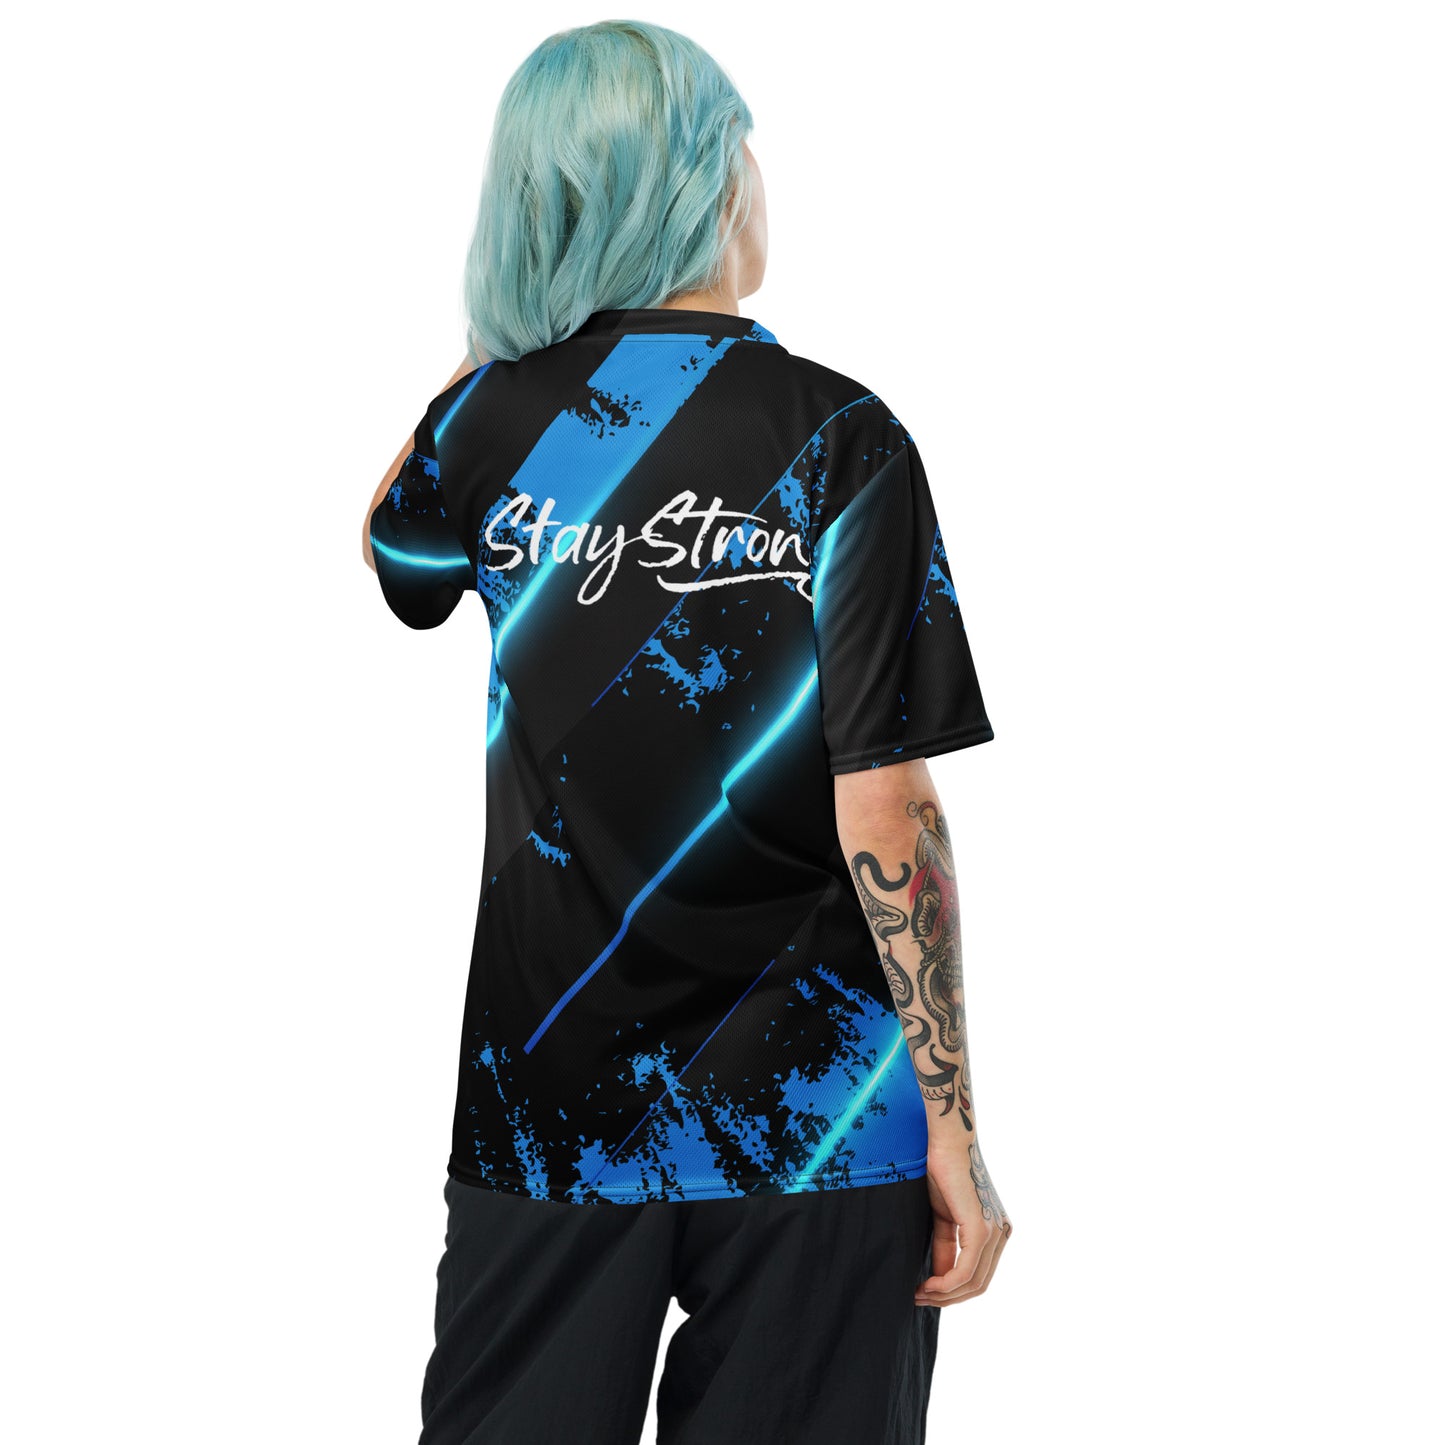 ONE VISION - NEW - CUSTOM - Recycled unisex sports jersey